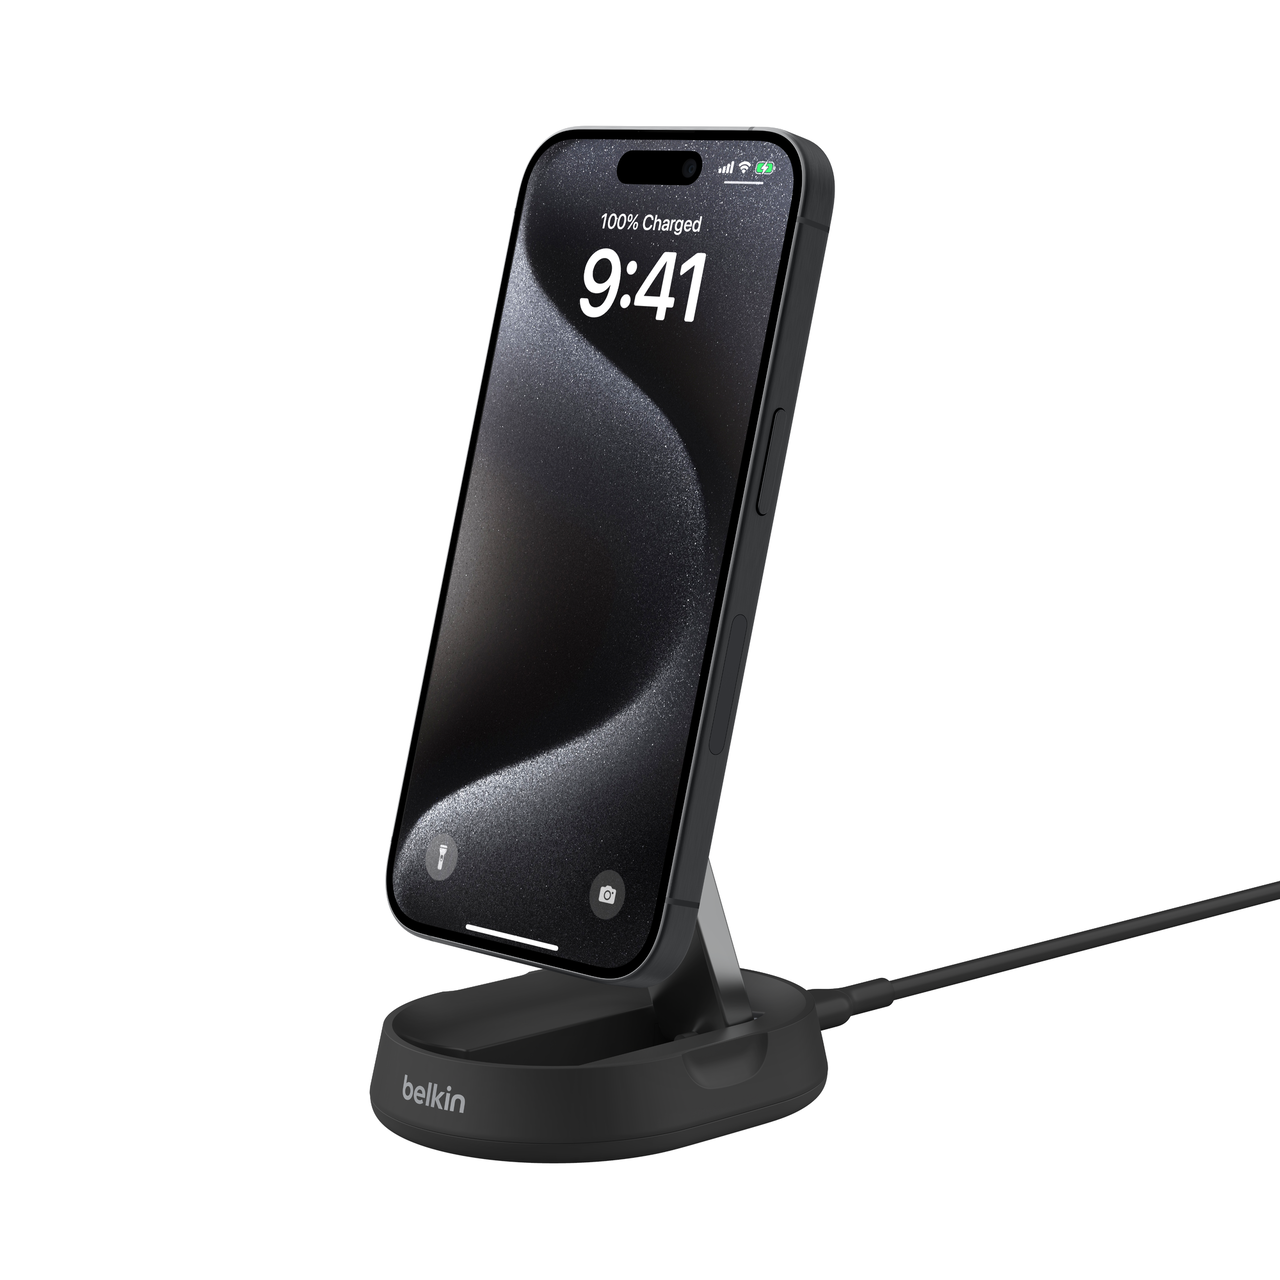 Magnetic car phone holders: To hold your smartphone with style and safety -  Times of India